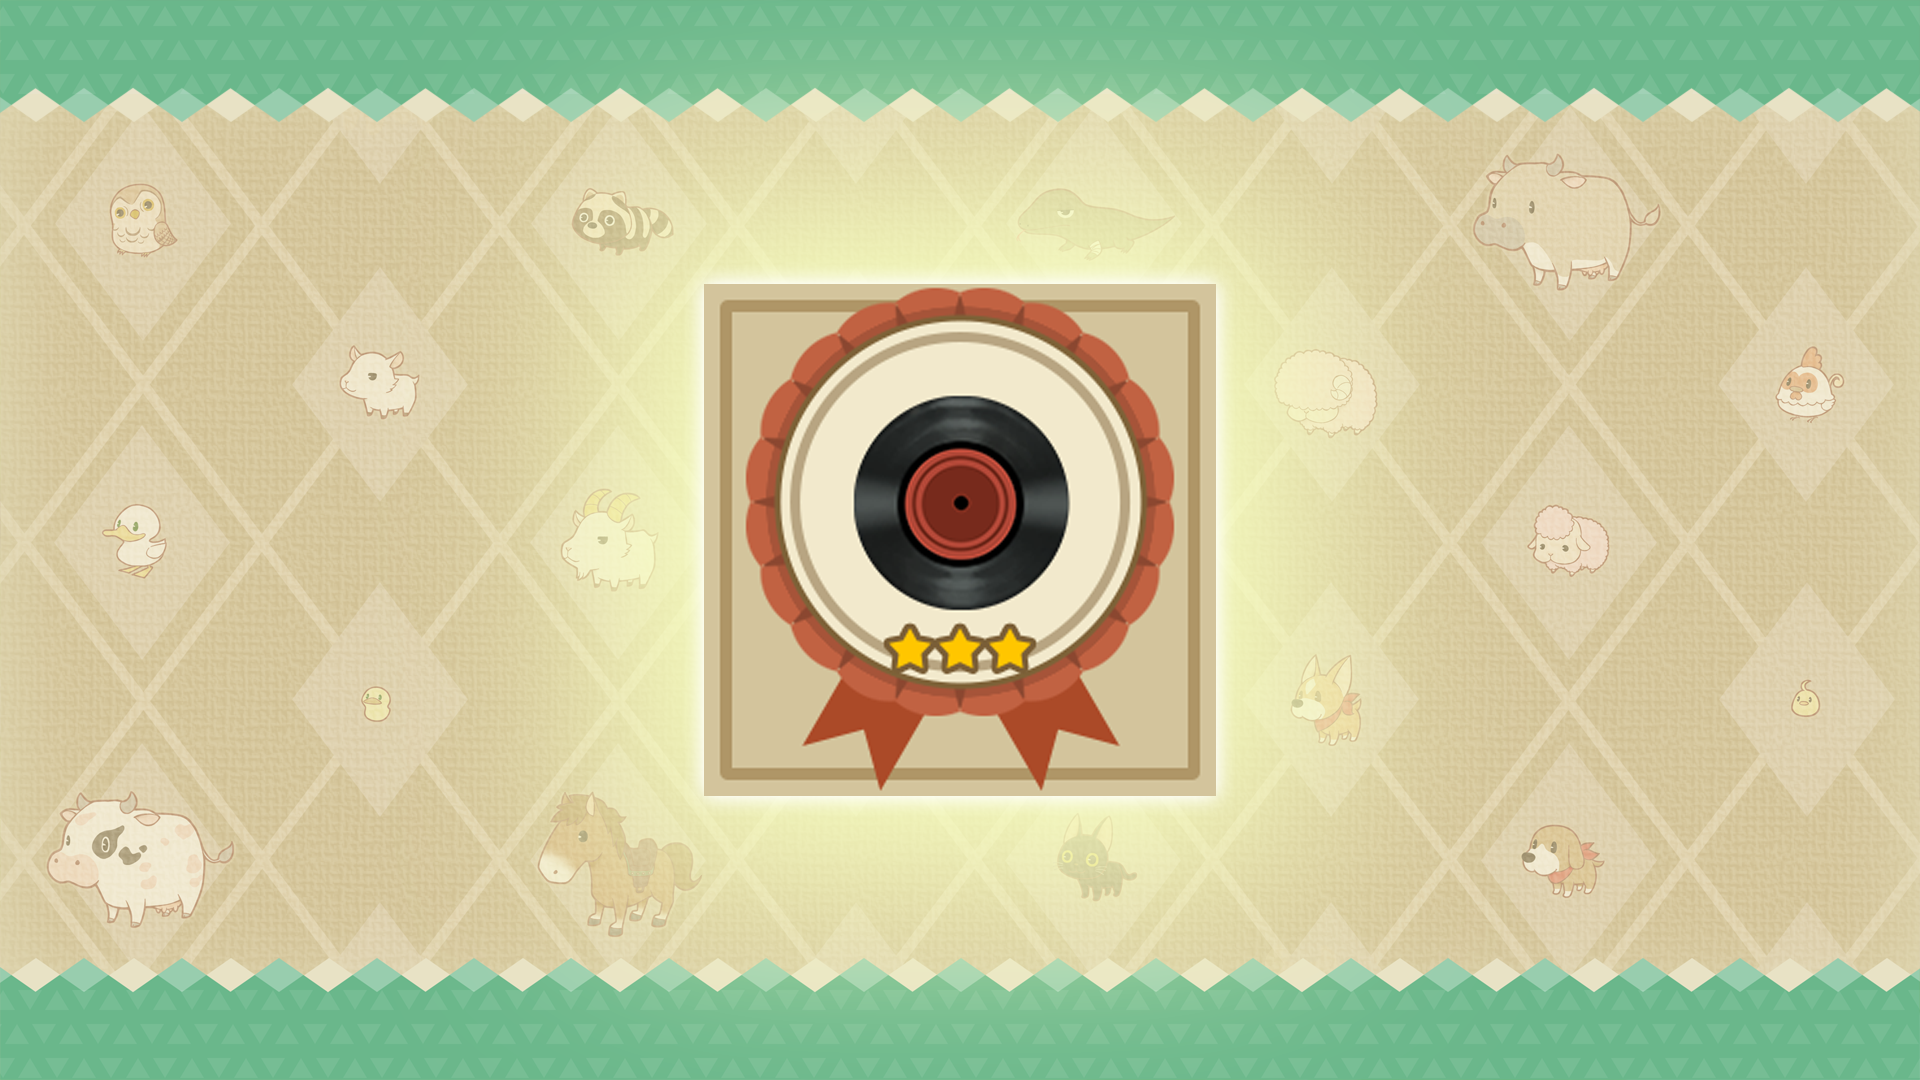 Icon for Obtained 7 total records.